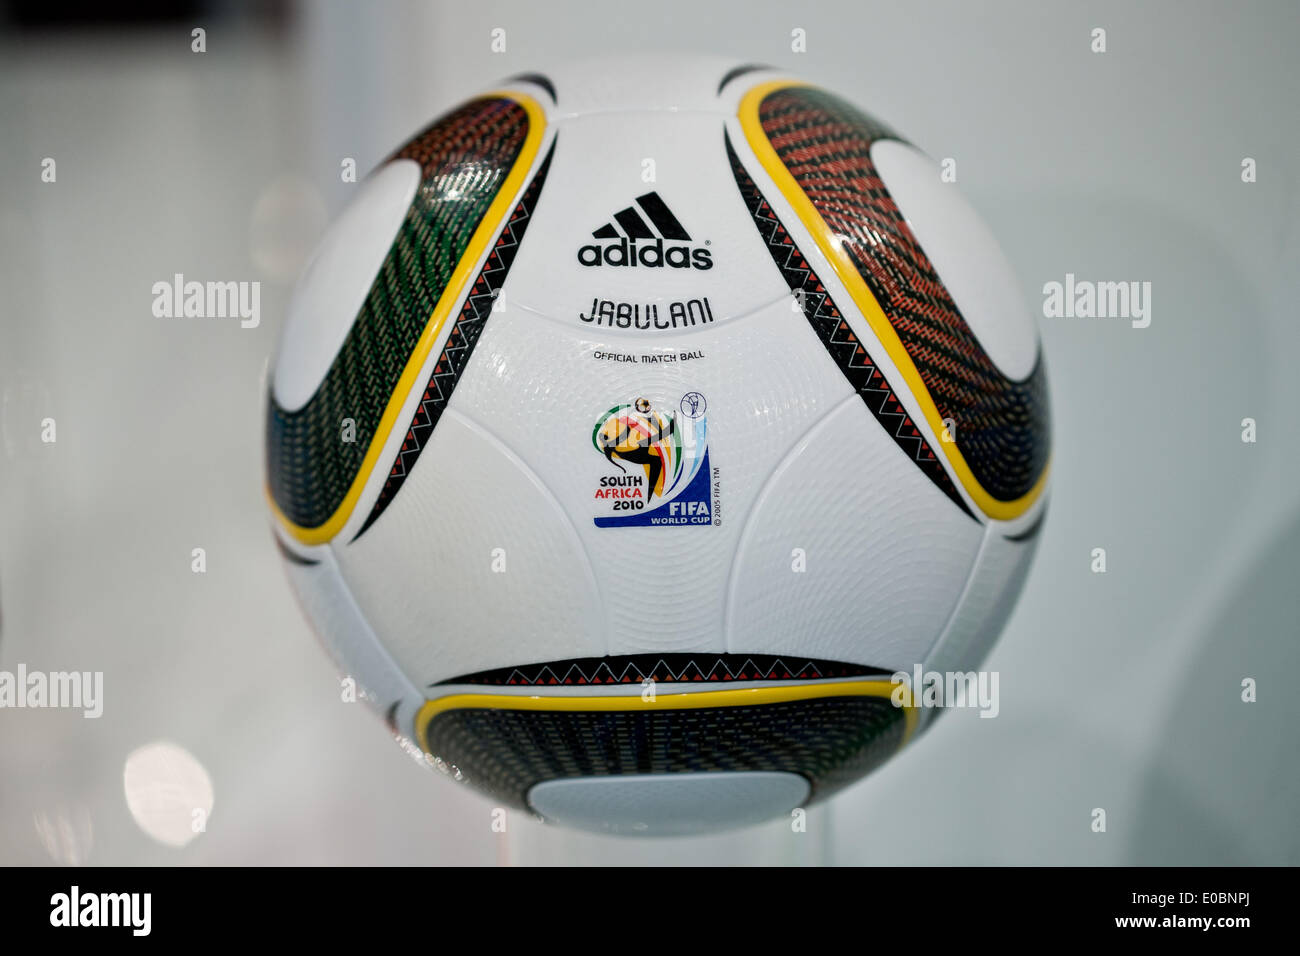 The 'Jabulani' soccer ball which was the official ball of the 2010 soccer world cup in South Africa is pictured during the general meeting of sporting goods manufacturer adidas in Fuerth, Germany, 08 May 2014. Photo: DANIEL KARMANN/dpa Stock Photo